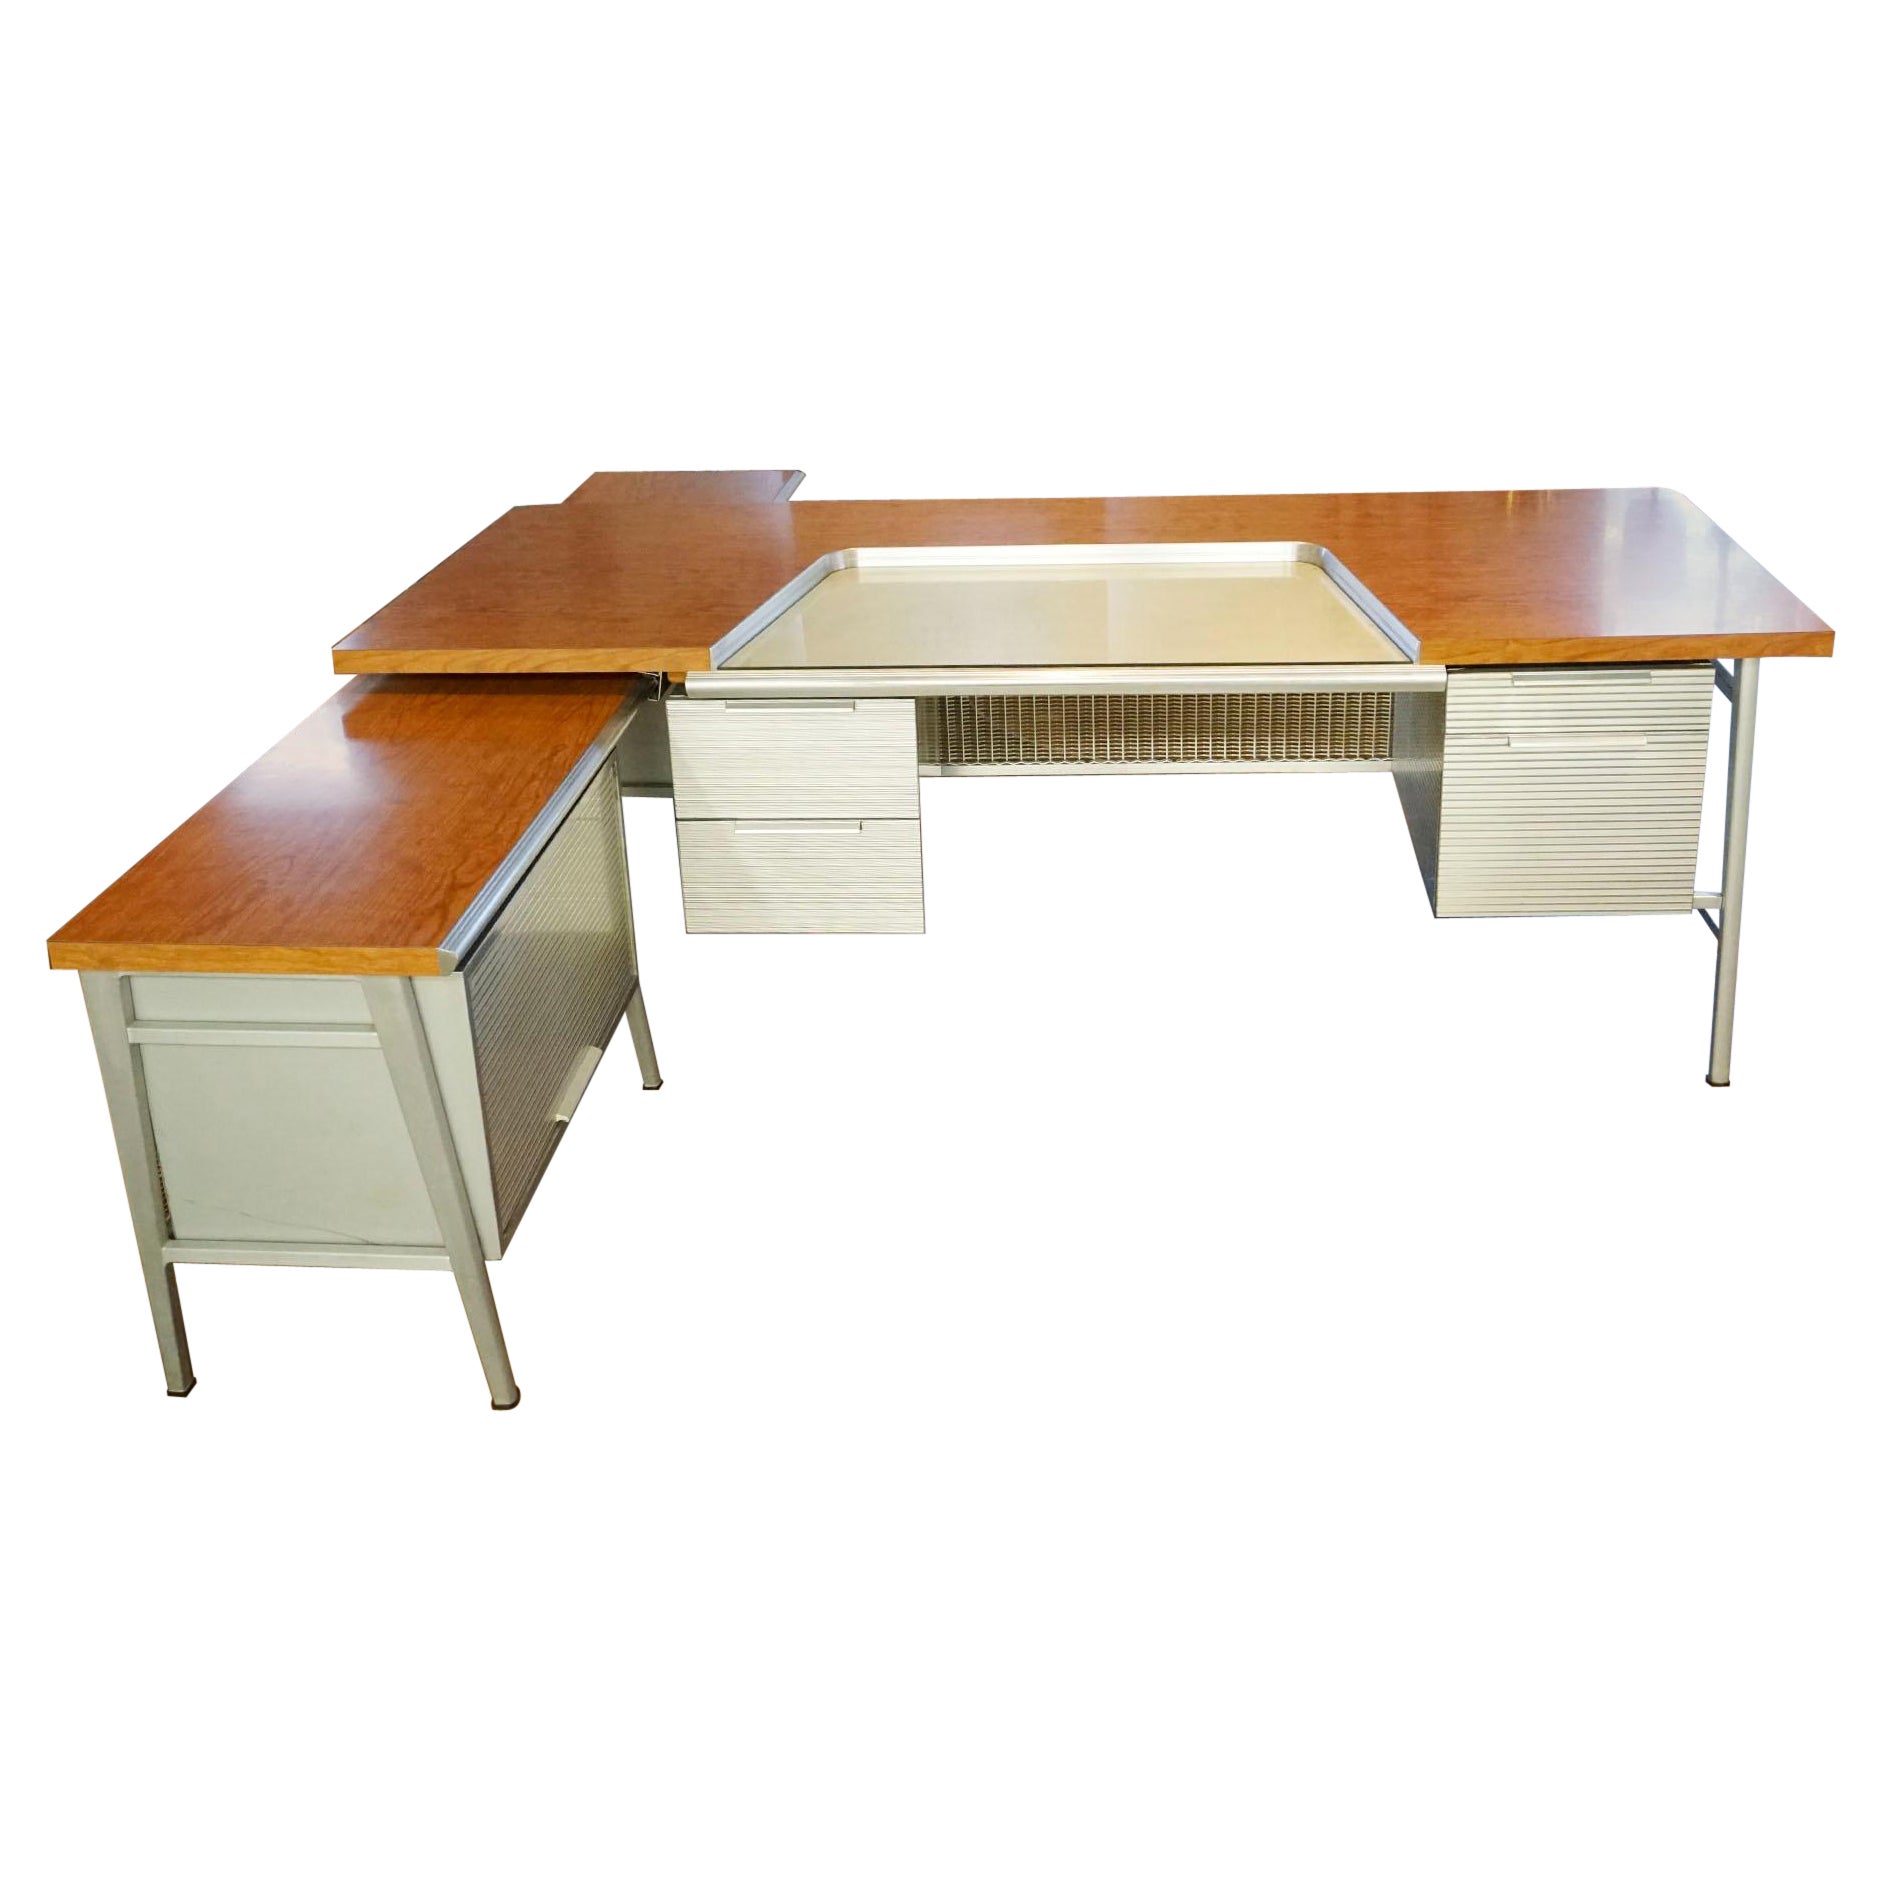 Custom Desk with Credenza by Gordon Bunshaft for General Fireproofing Company